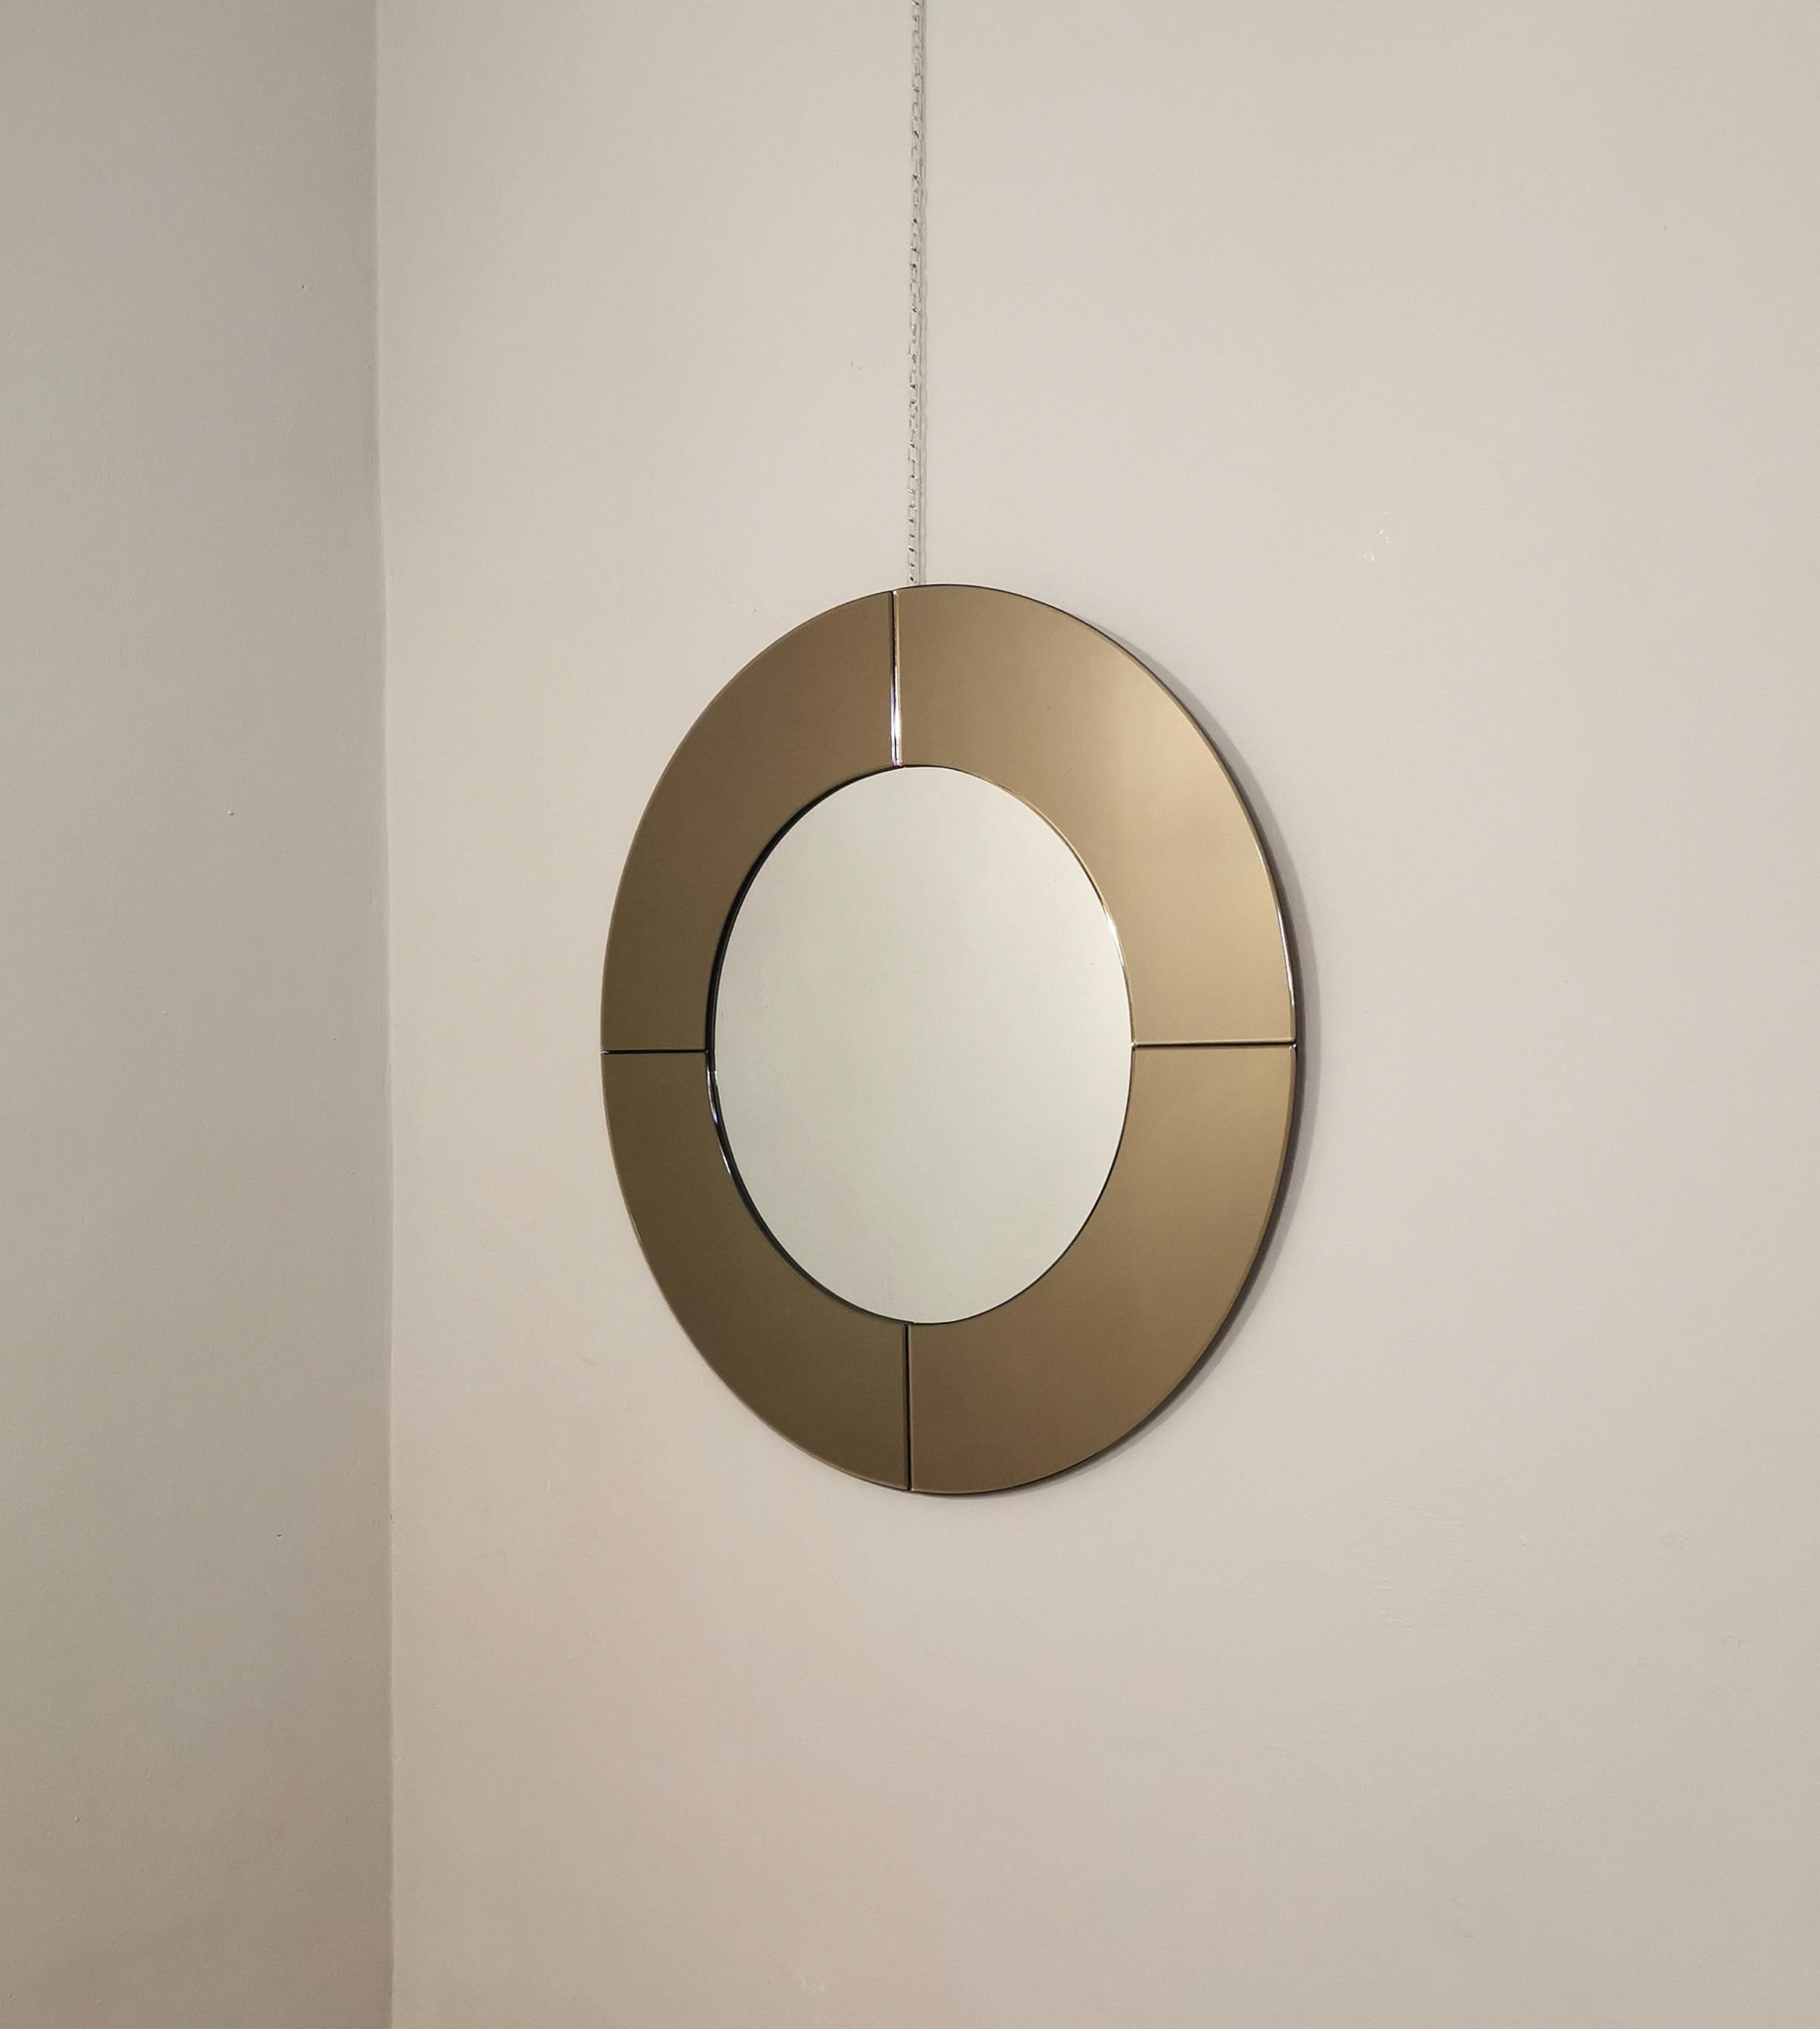 Imposing and elegant circular wall mirror in mirrored glass in the shade of smoky gray. The mirror is adaptable to any type of environment from vintage to modern. Made in Italy in the 70s.




Note: We try to offer our customers an excellent service